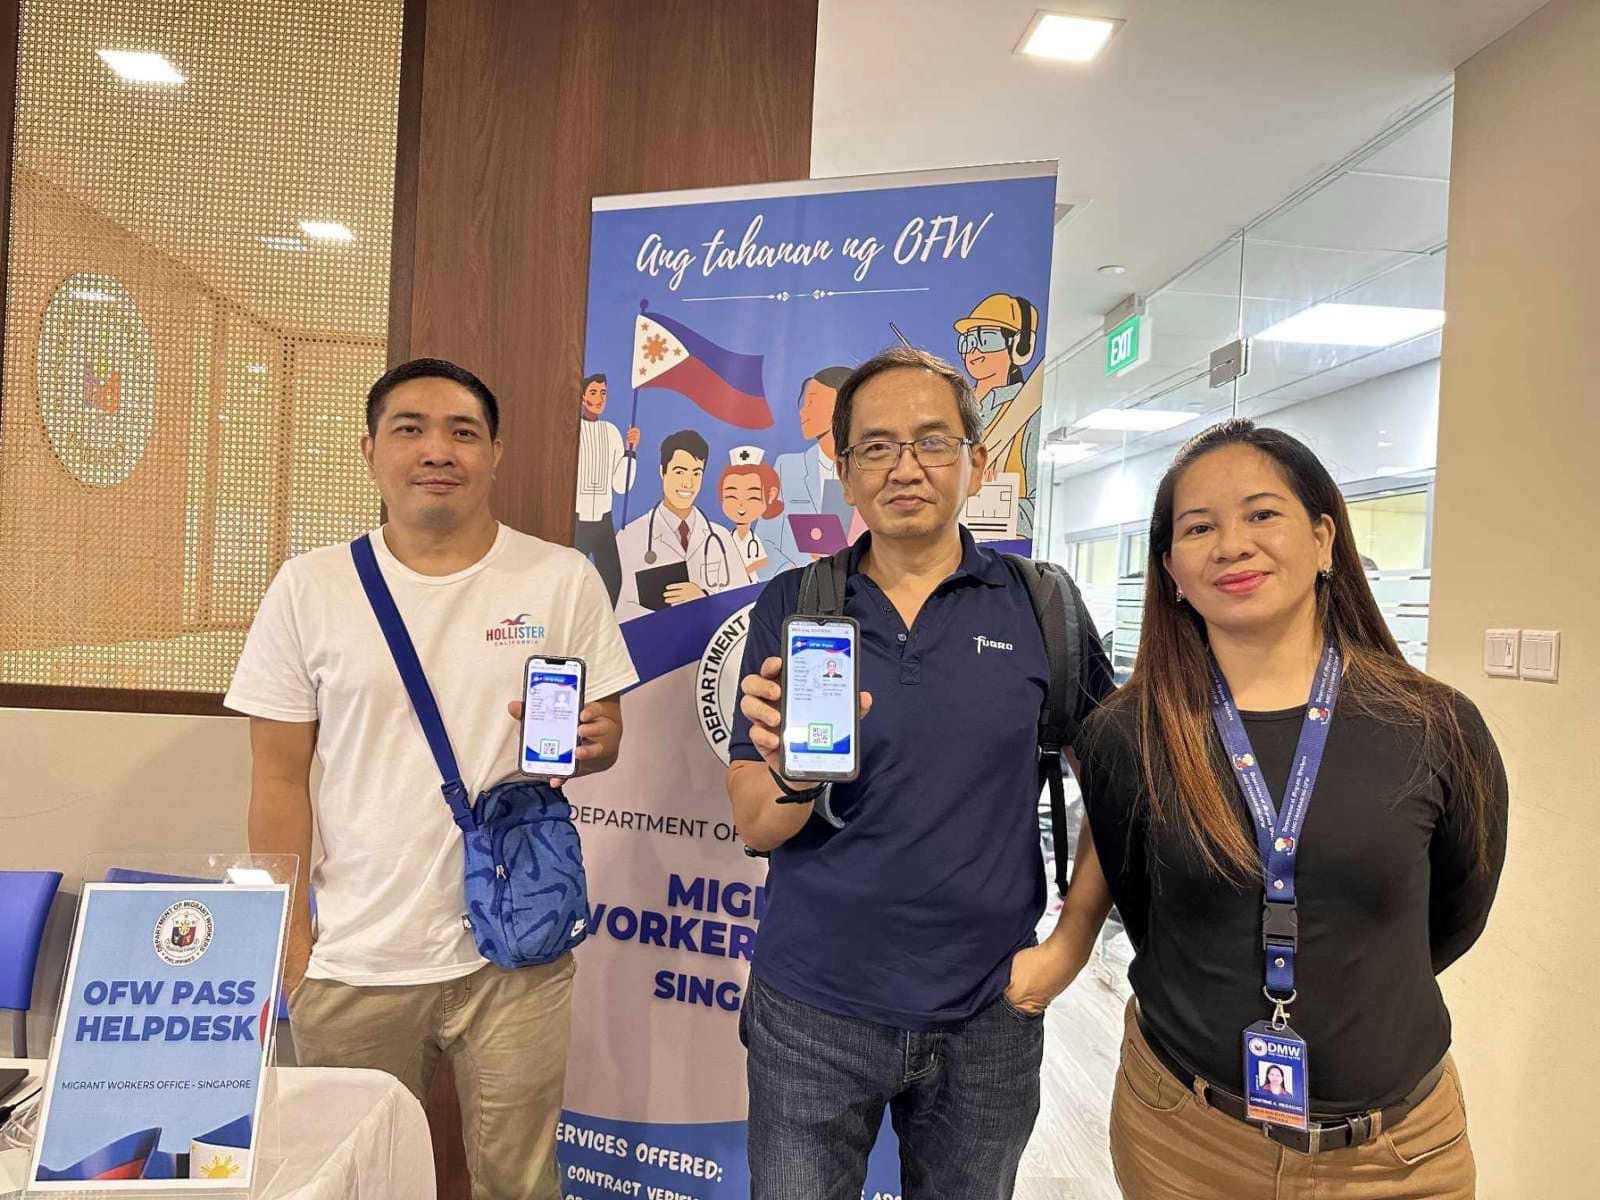 DMW Mobile App and OFW Pass at Filipino community events and activities.